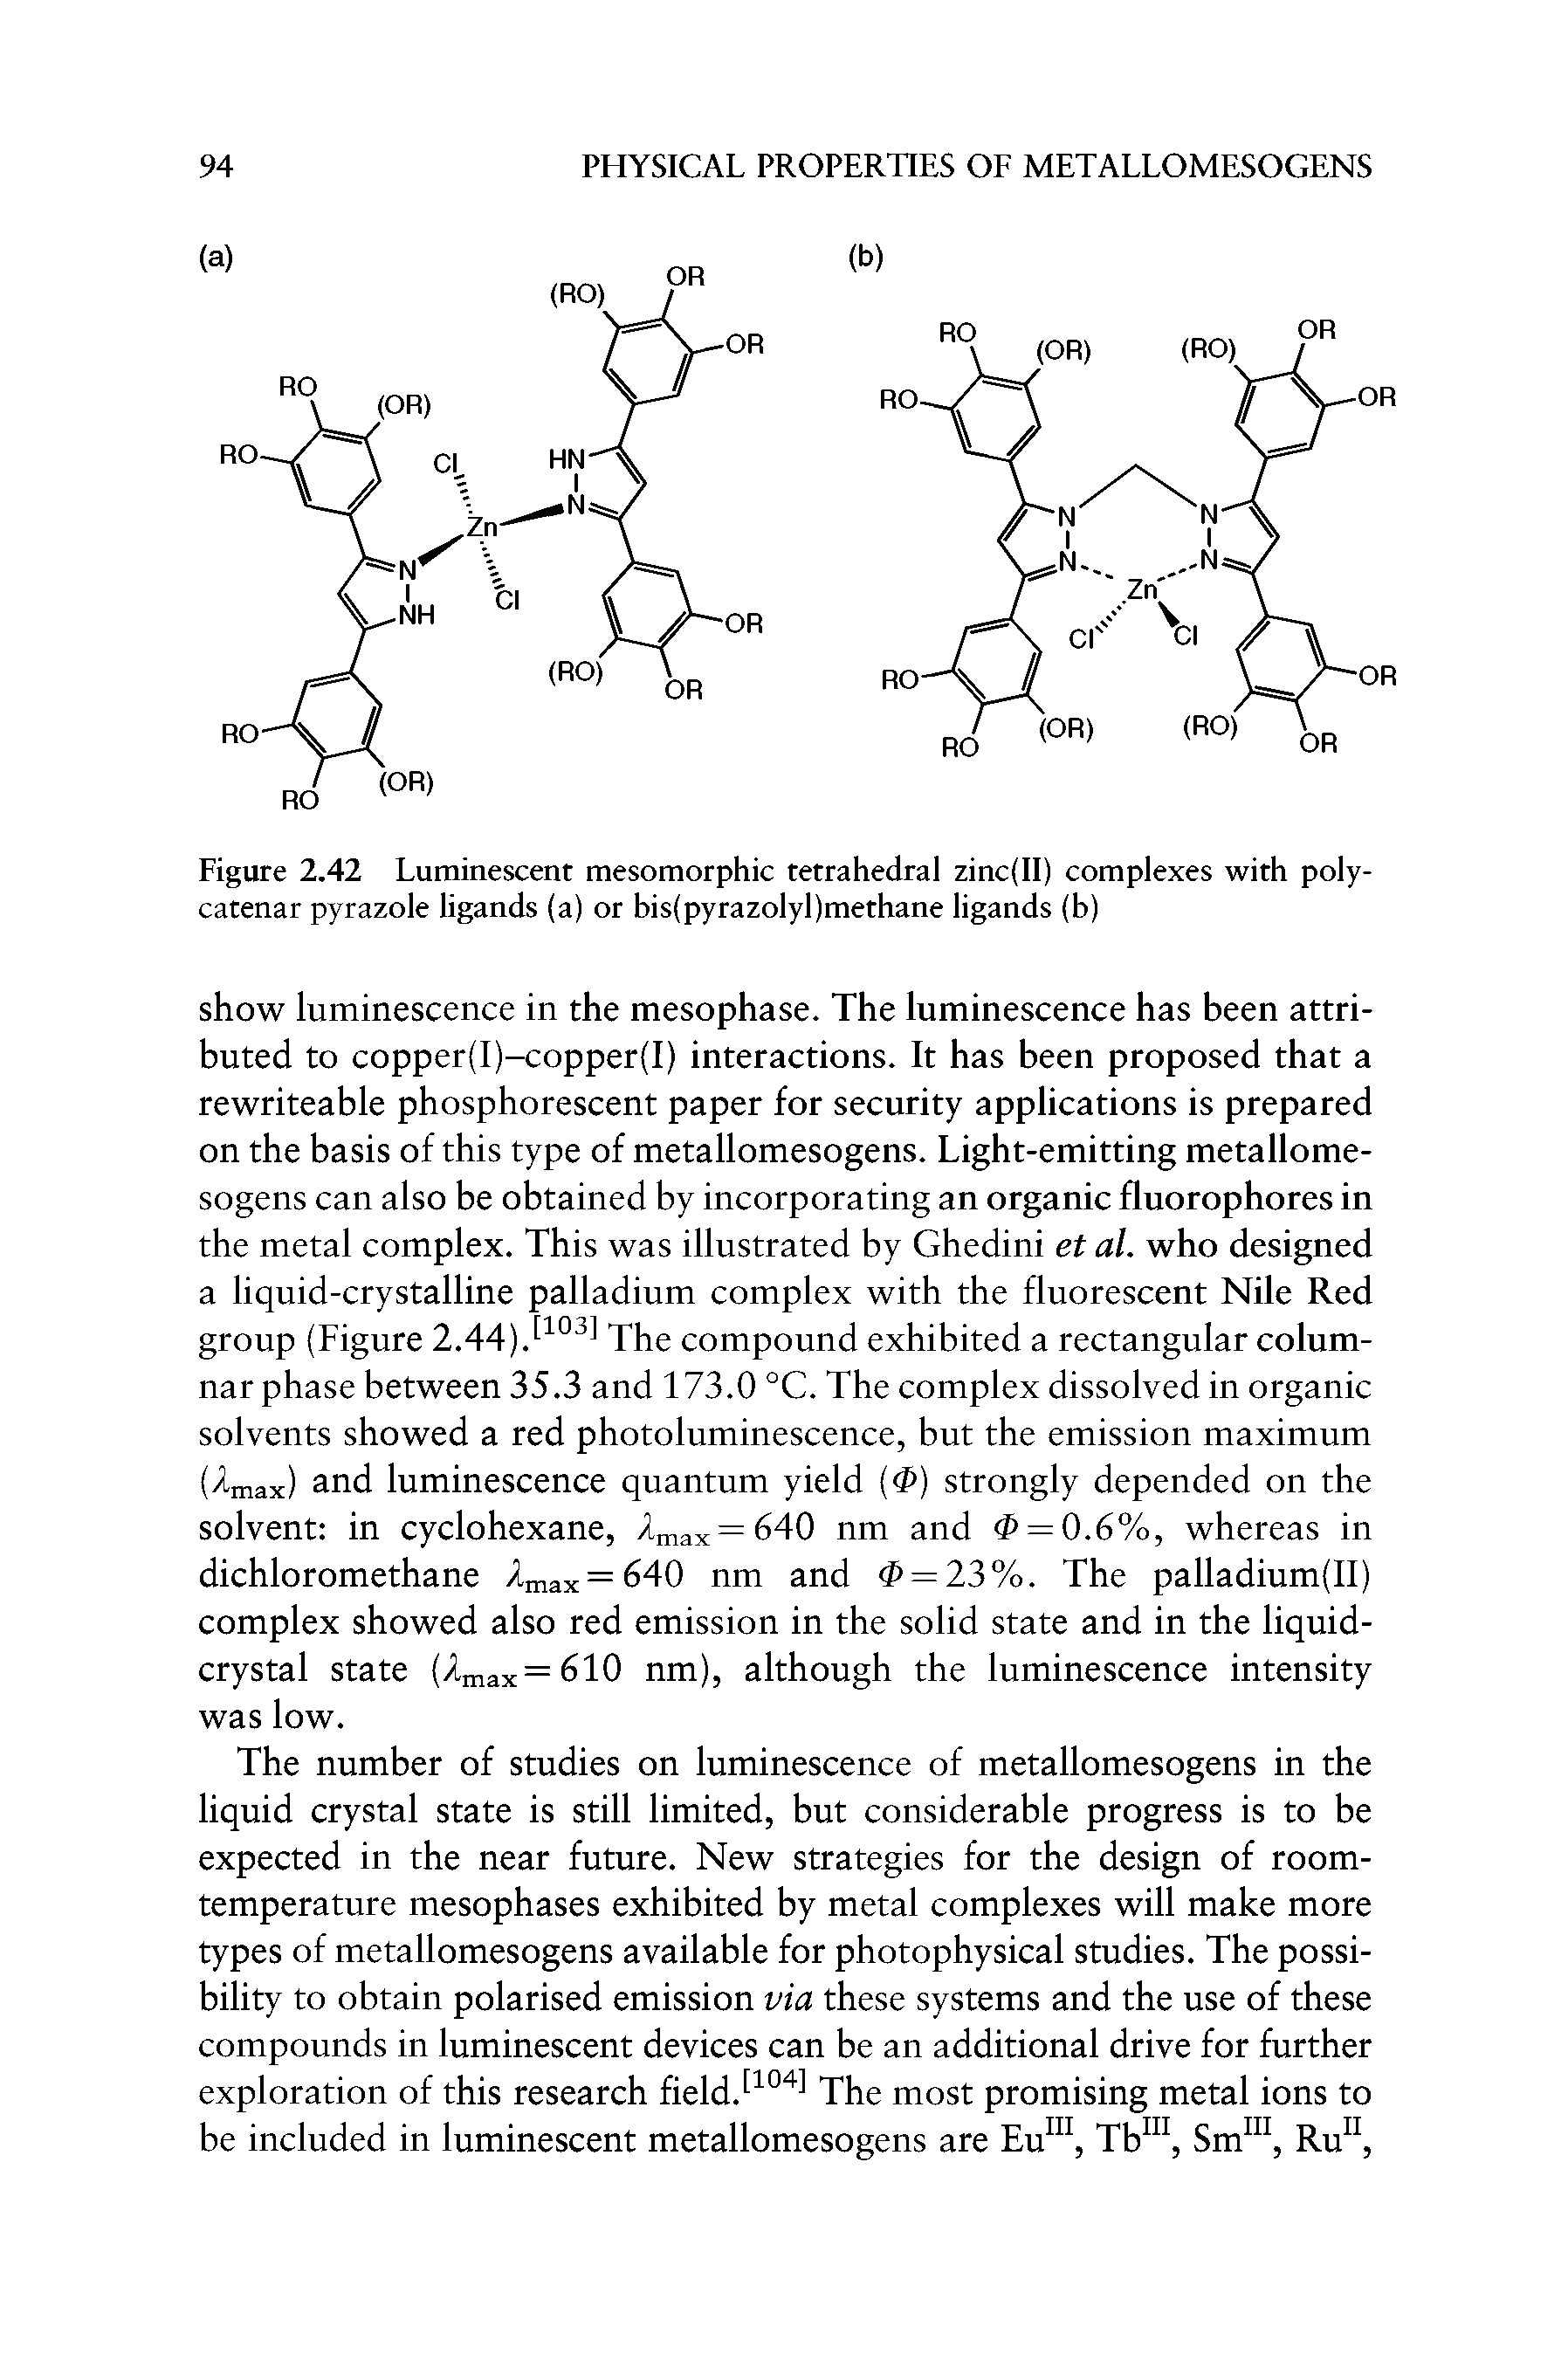 Figure 2.42 Luminescent mesomorphic tetrahedral zinc(II) complexes with poly-catenar pyrazole ligands (a) or bis(pyrazolyl)methane ligands (b)...